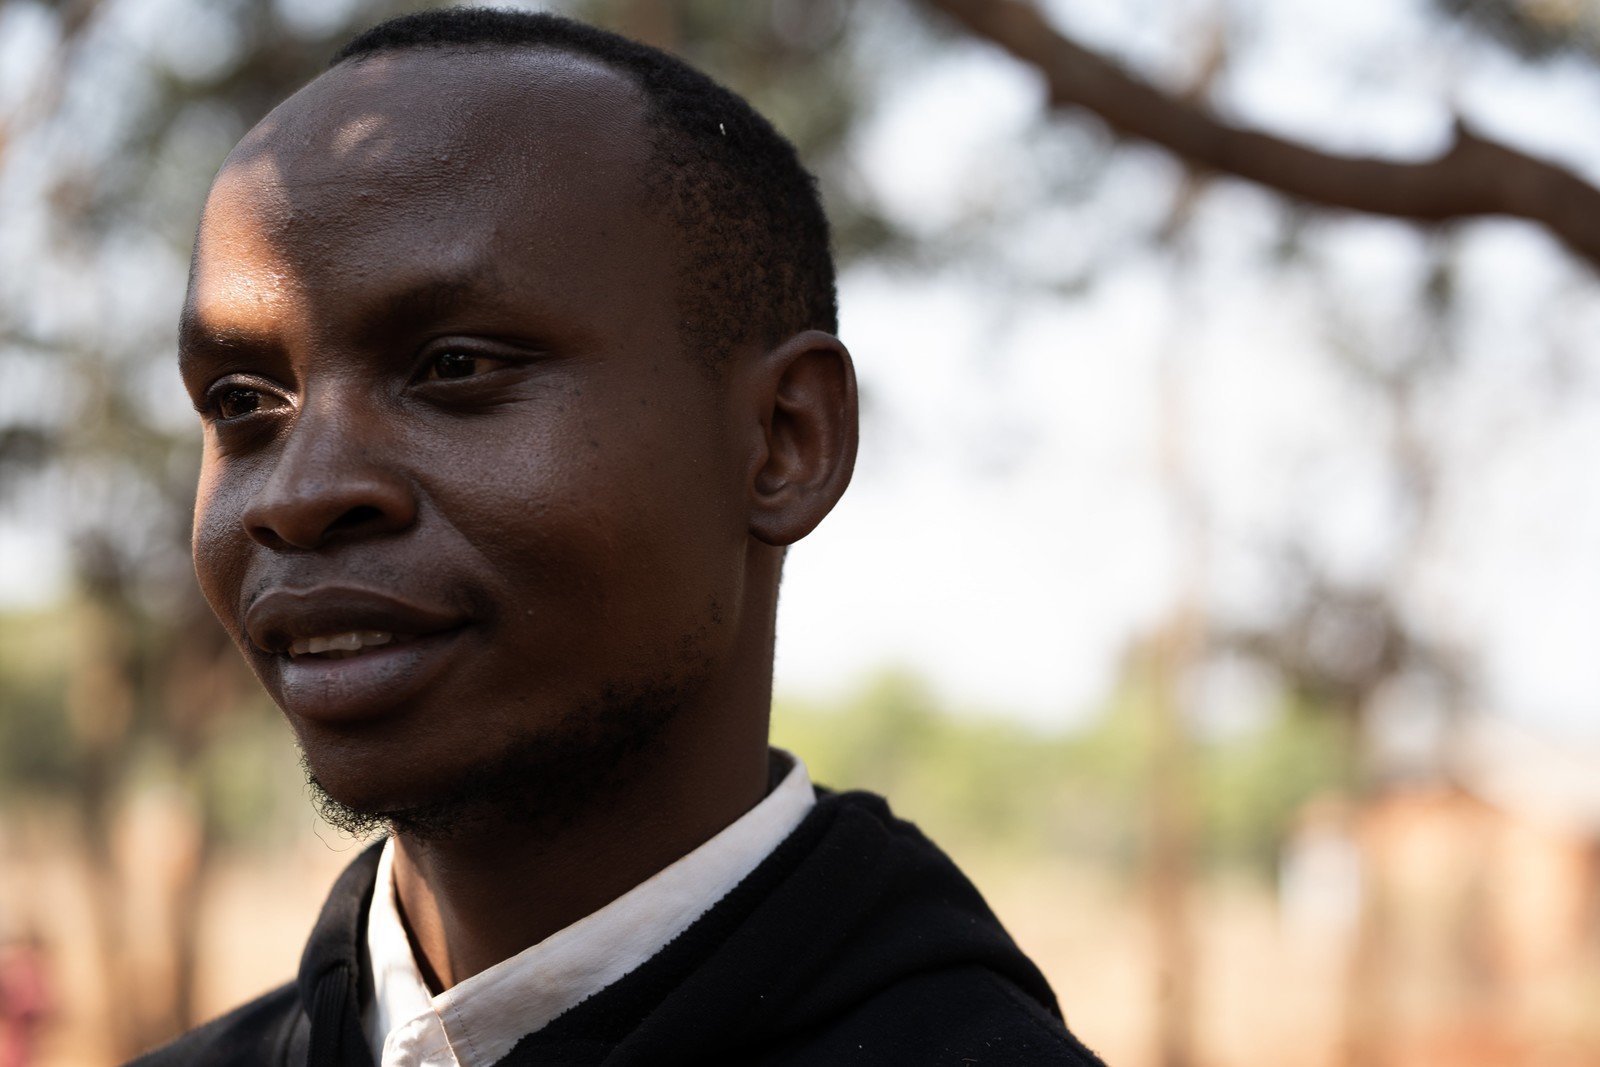 ‘My dream is to help people help themselves. I envision that in 10 years, every village in this area will have animators to fight for their rights,’ Joseph, the program officer, said with a smile.